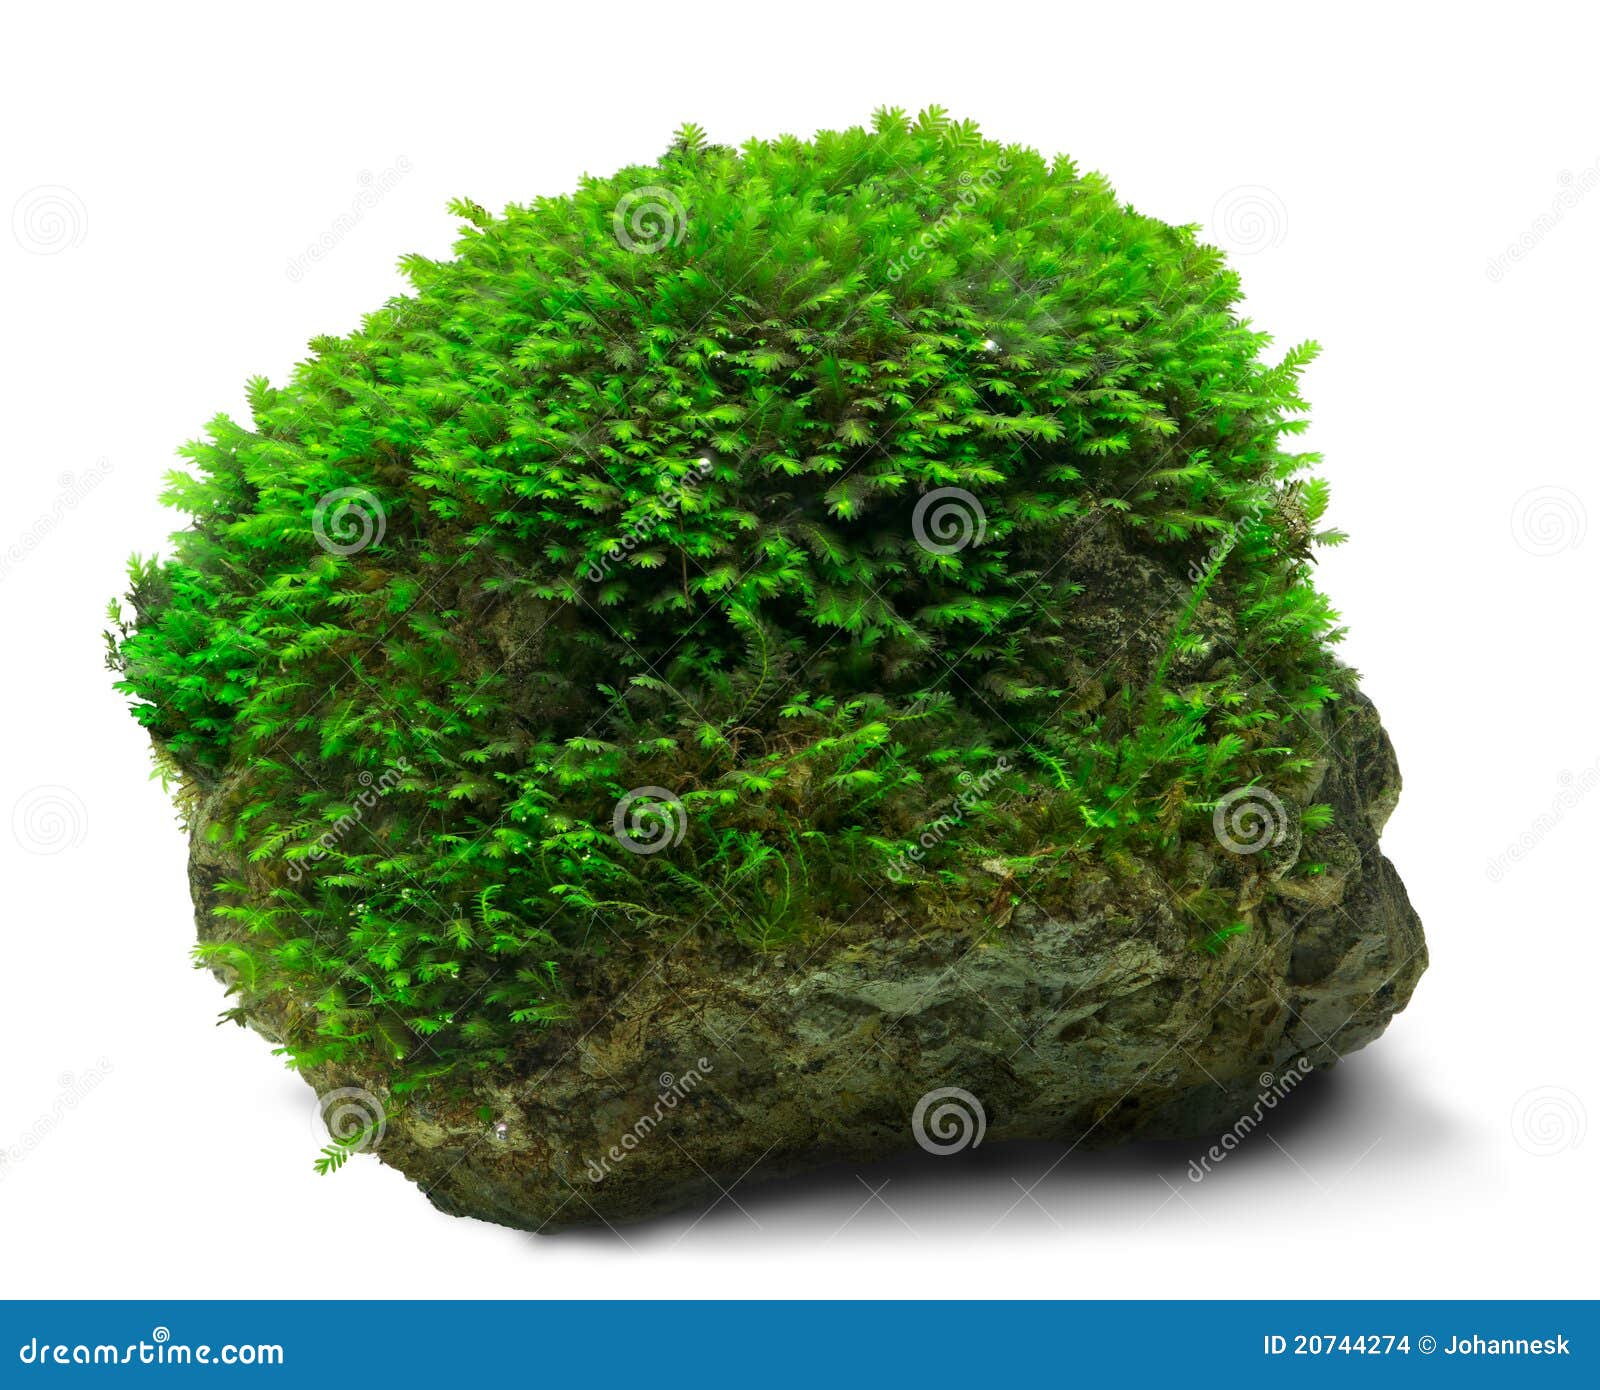 Moss and rock stock photo. Image of green, plant, fissidens - 20744274 Moss On Rocks In Aquarium